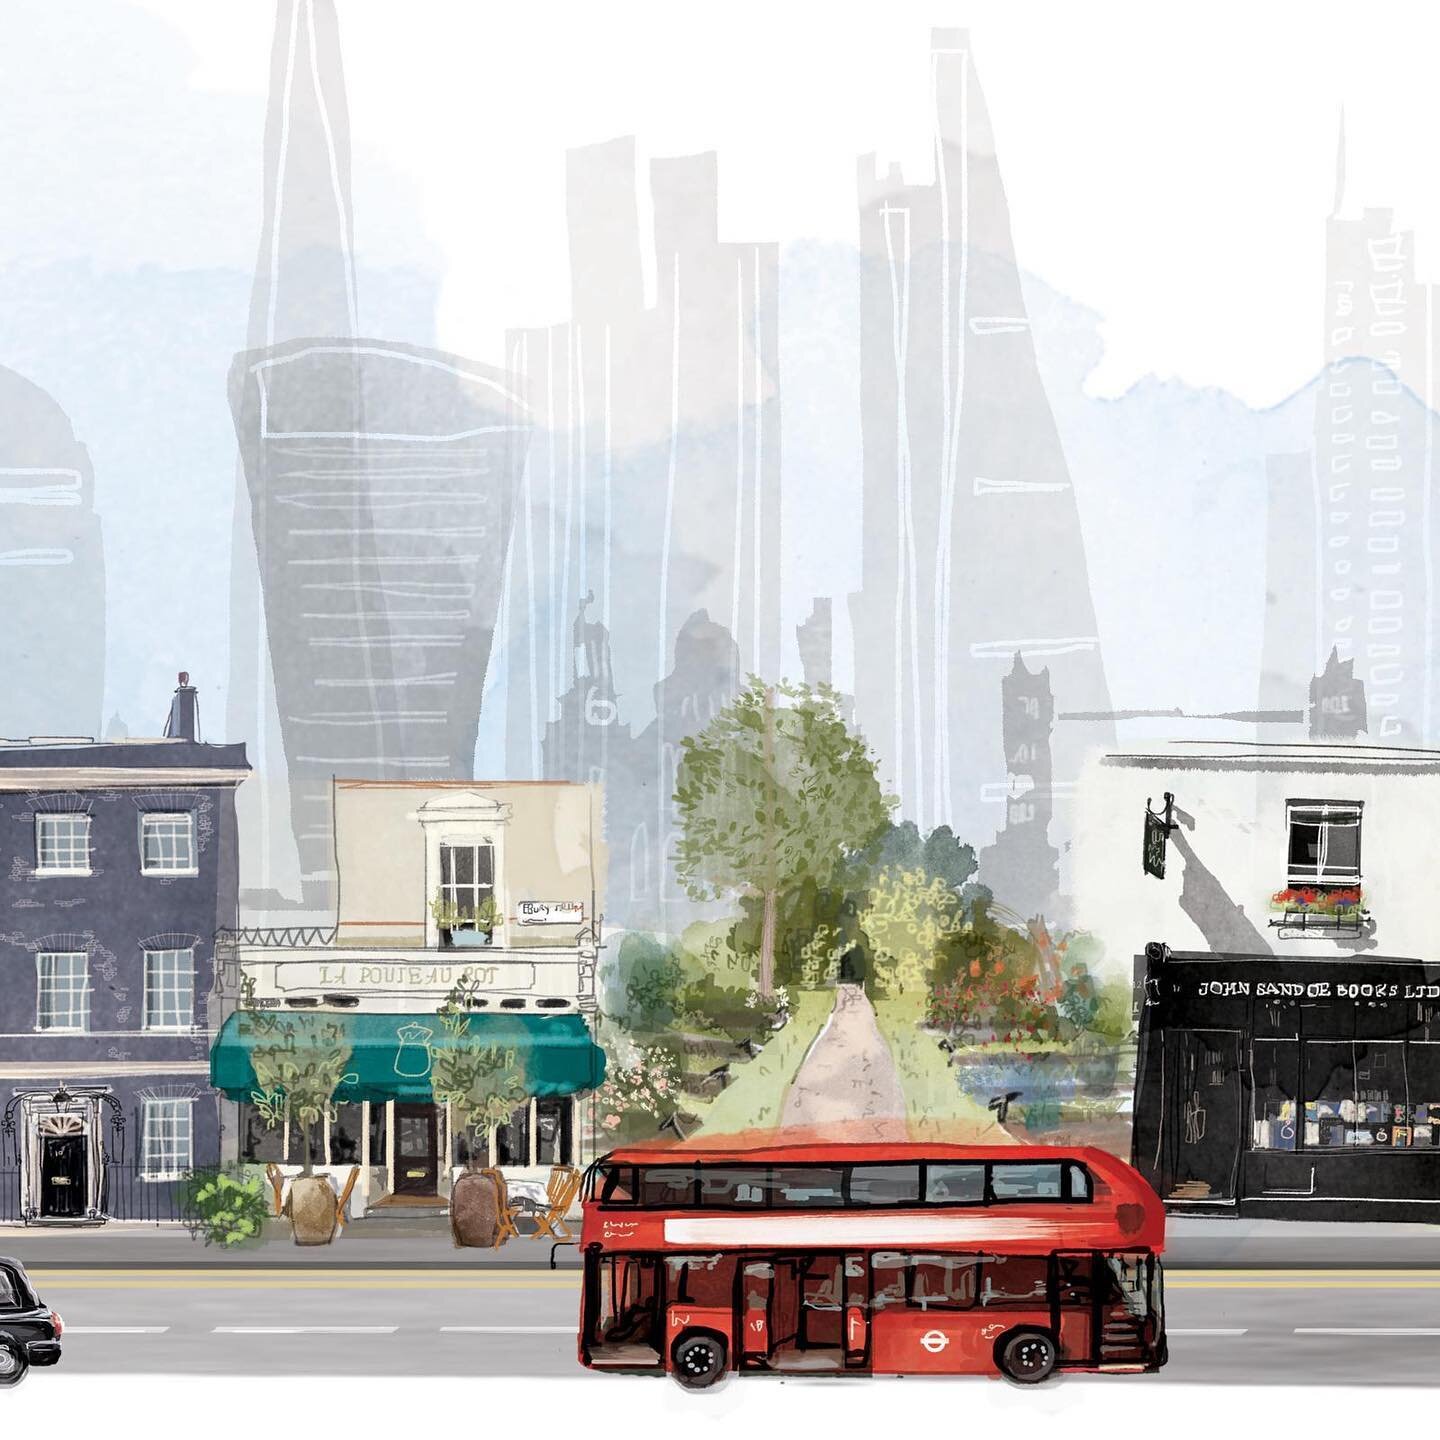 Falling in love with London all over again with this commission for @countrylifemagazine thank you @emilyrose_anderson for the beautiful brief. ✨

Seeing the city through the eyes and words of @jo_rodgers I loved diving deep into the visual details o